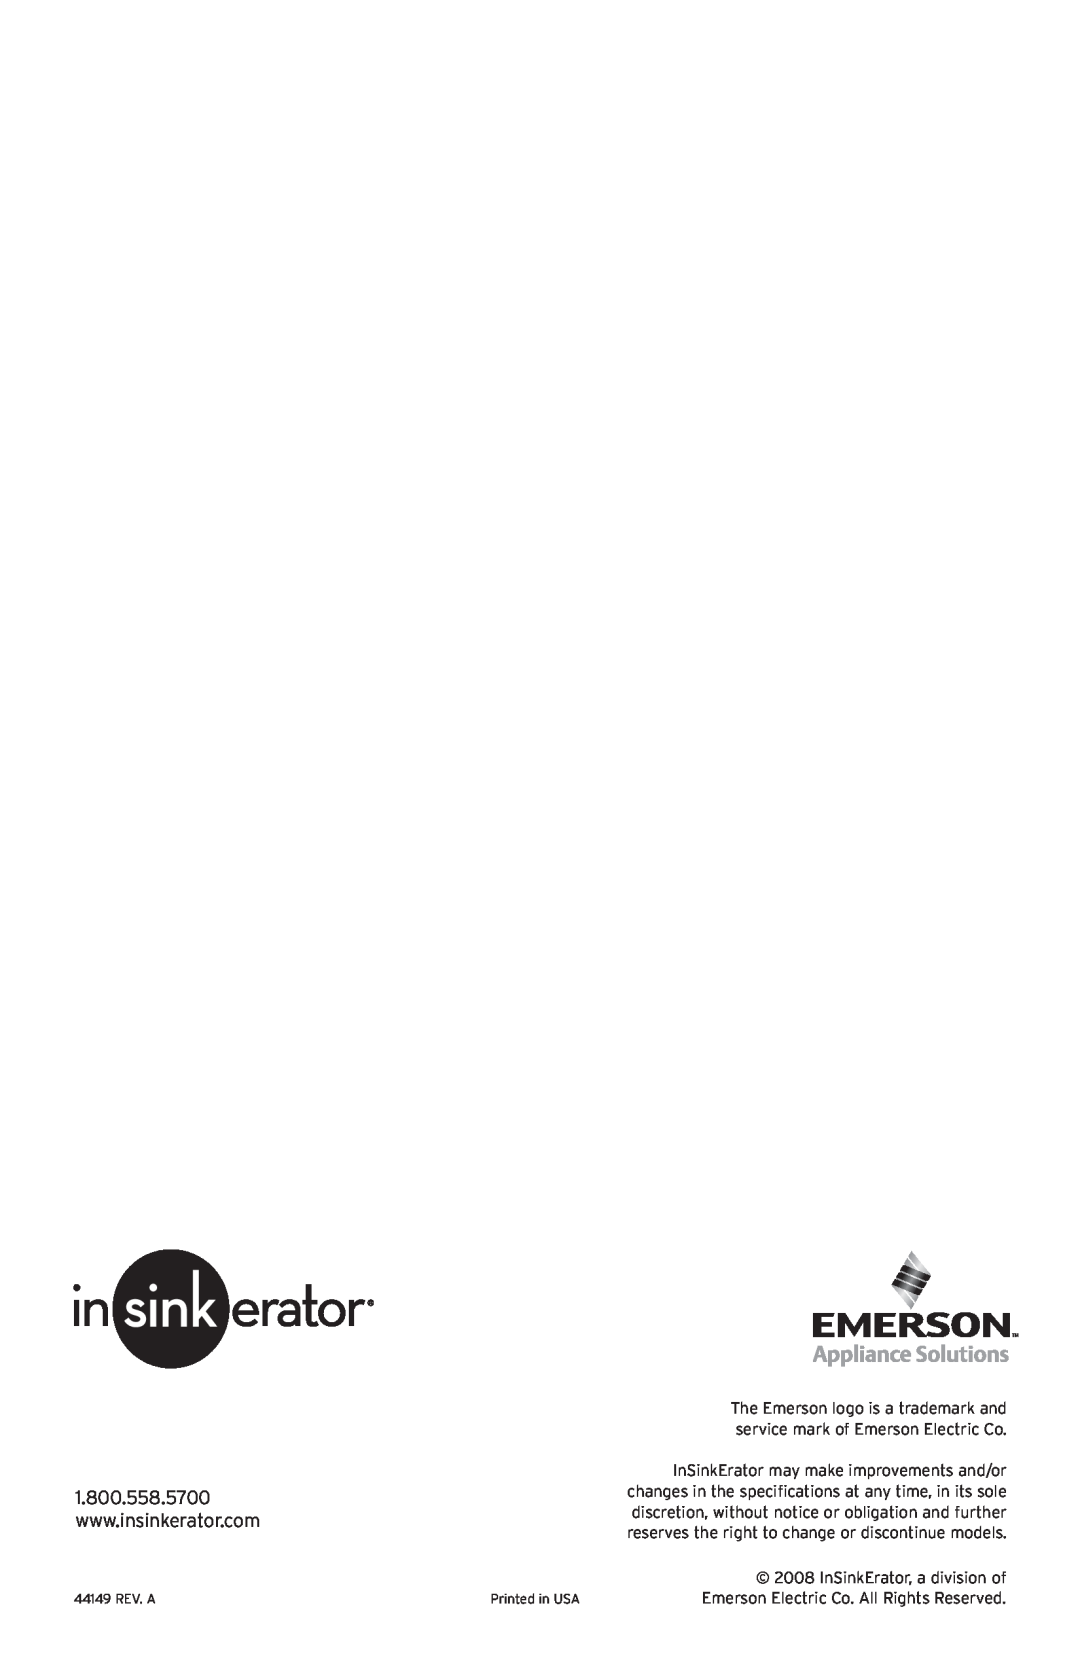 InSinkErator CWT-00, F-C1100 owner manual InSinkErator, a division of, Emerson Electric Co. All Rights Reserved 